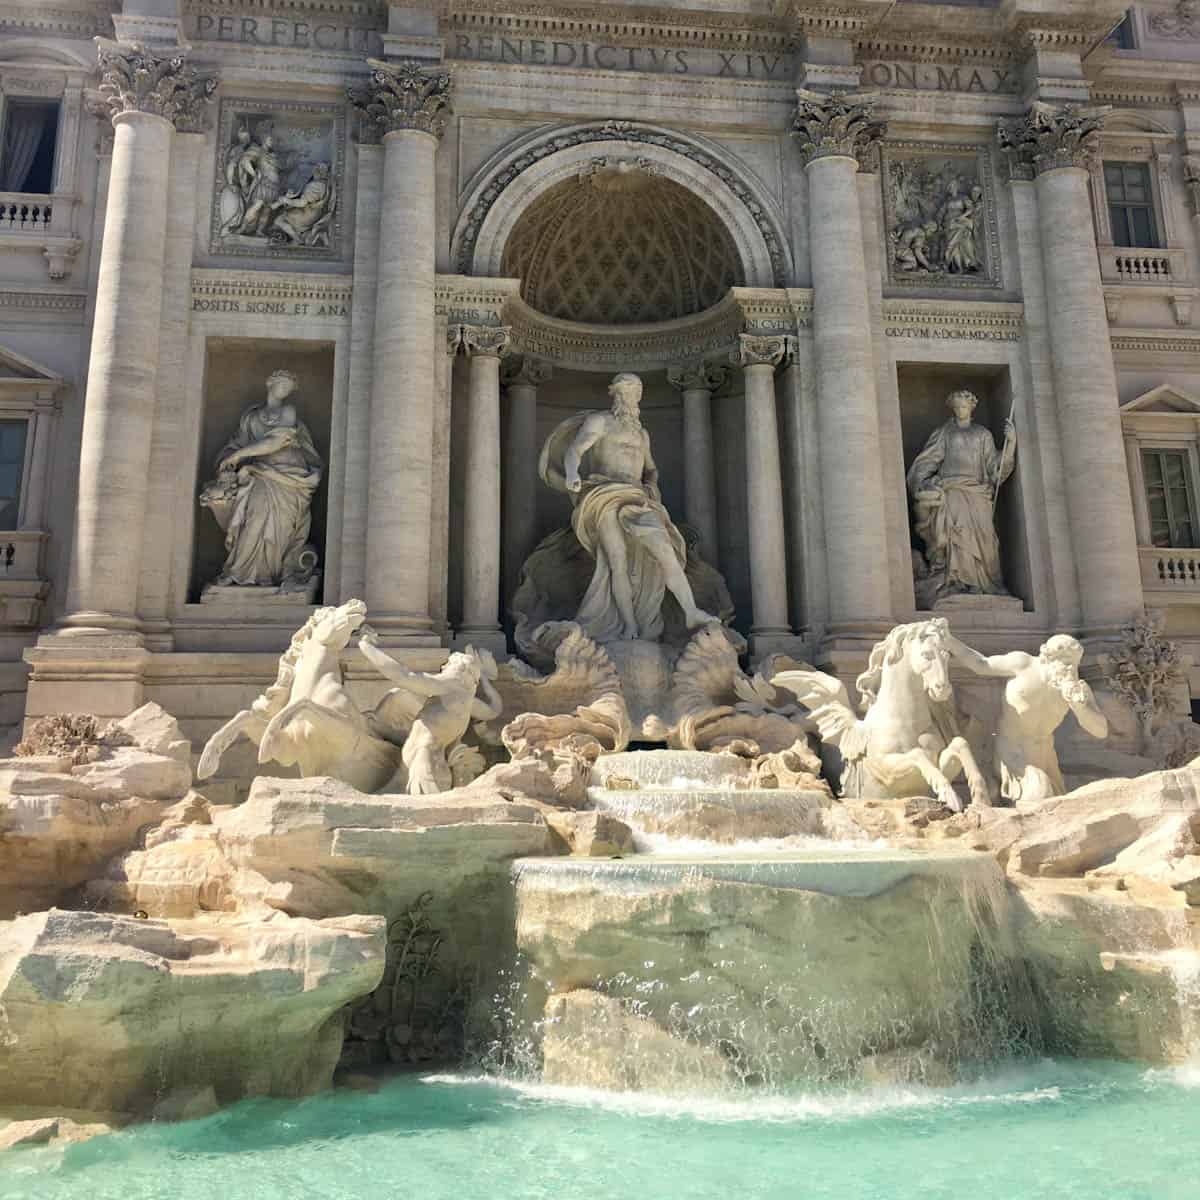 Close up of the Trevi Fountain showing central columns, carved winged horses and people, and water.